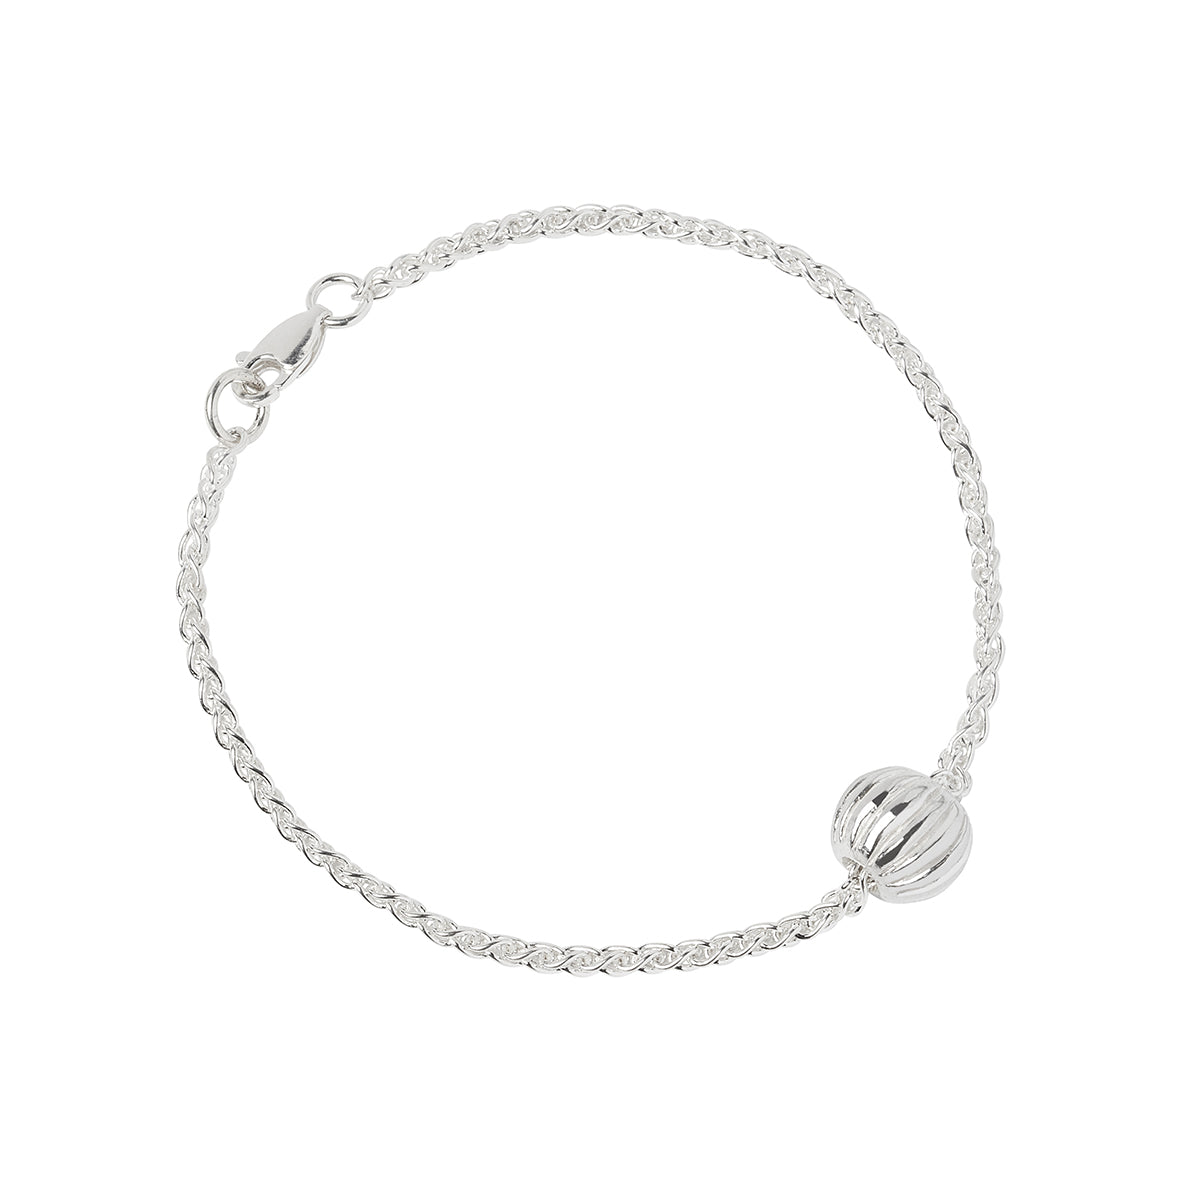 A sterling silver melon bead based on the Roman Melon Beads found at the Roman Sites in Northumberland, the bead is threaded onto a heavy silver spiga chain with a lobster catch on a white background. Handmade in Corbridge